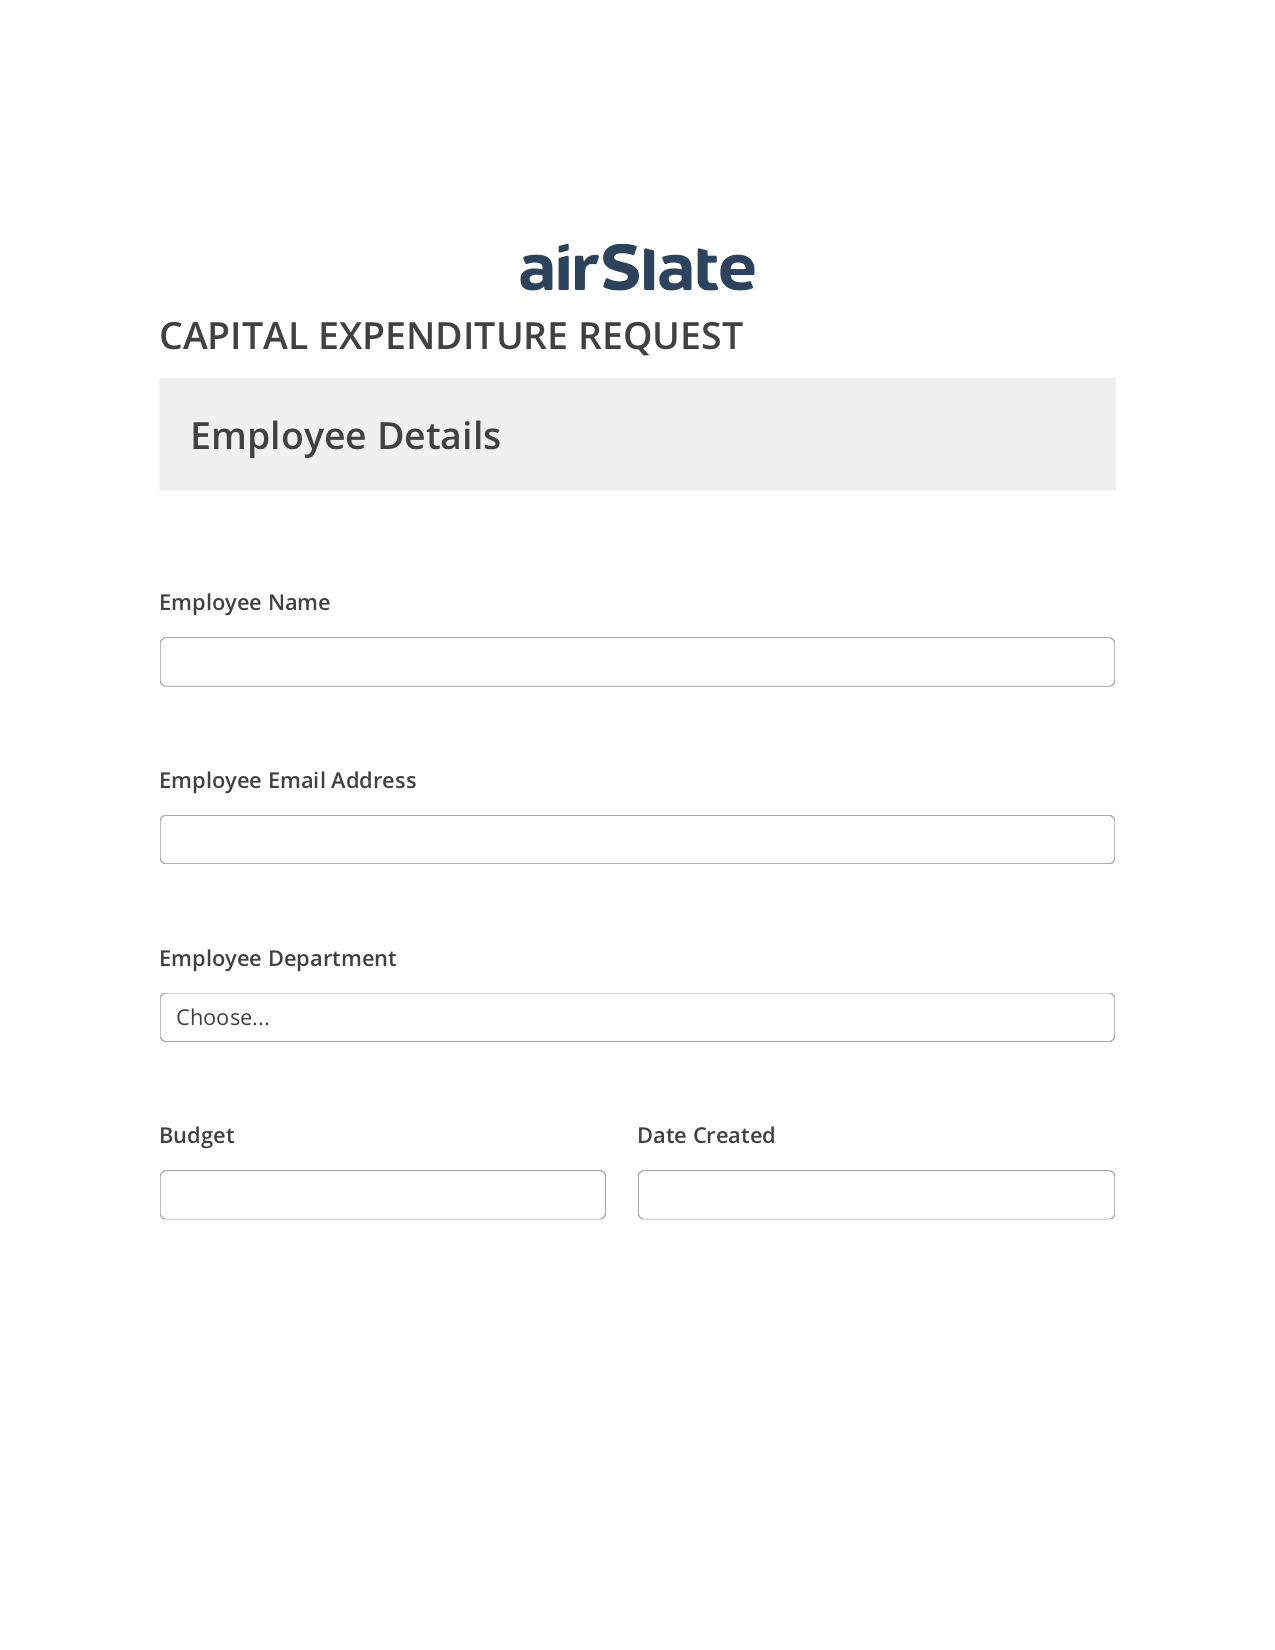 Capital Expenditure Request Approval Workflow System Bot - Slack Two-Way Binding Bot, Lock the Slate Bot, Export to NetSuite